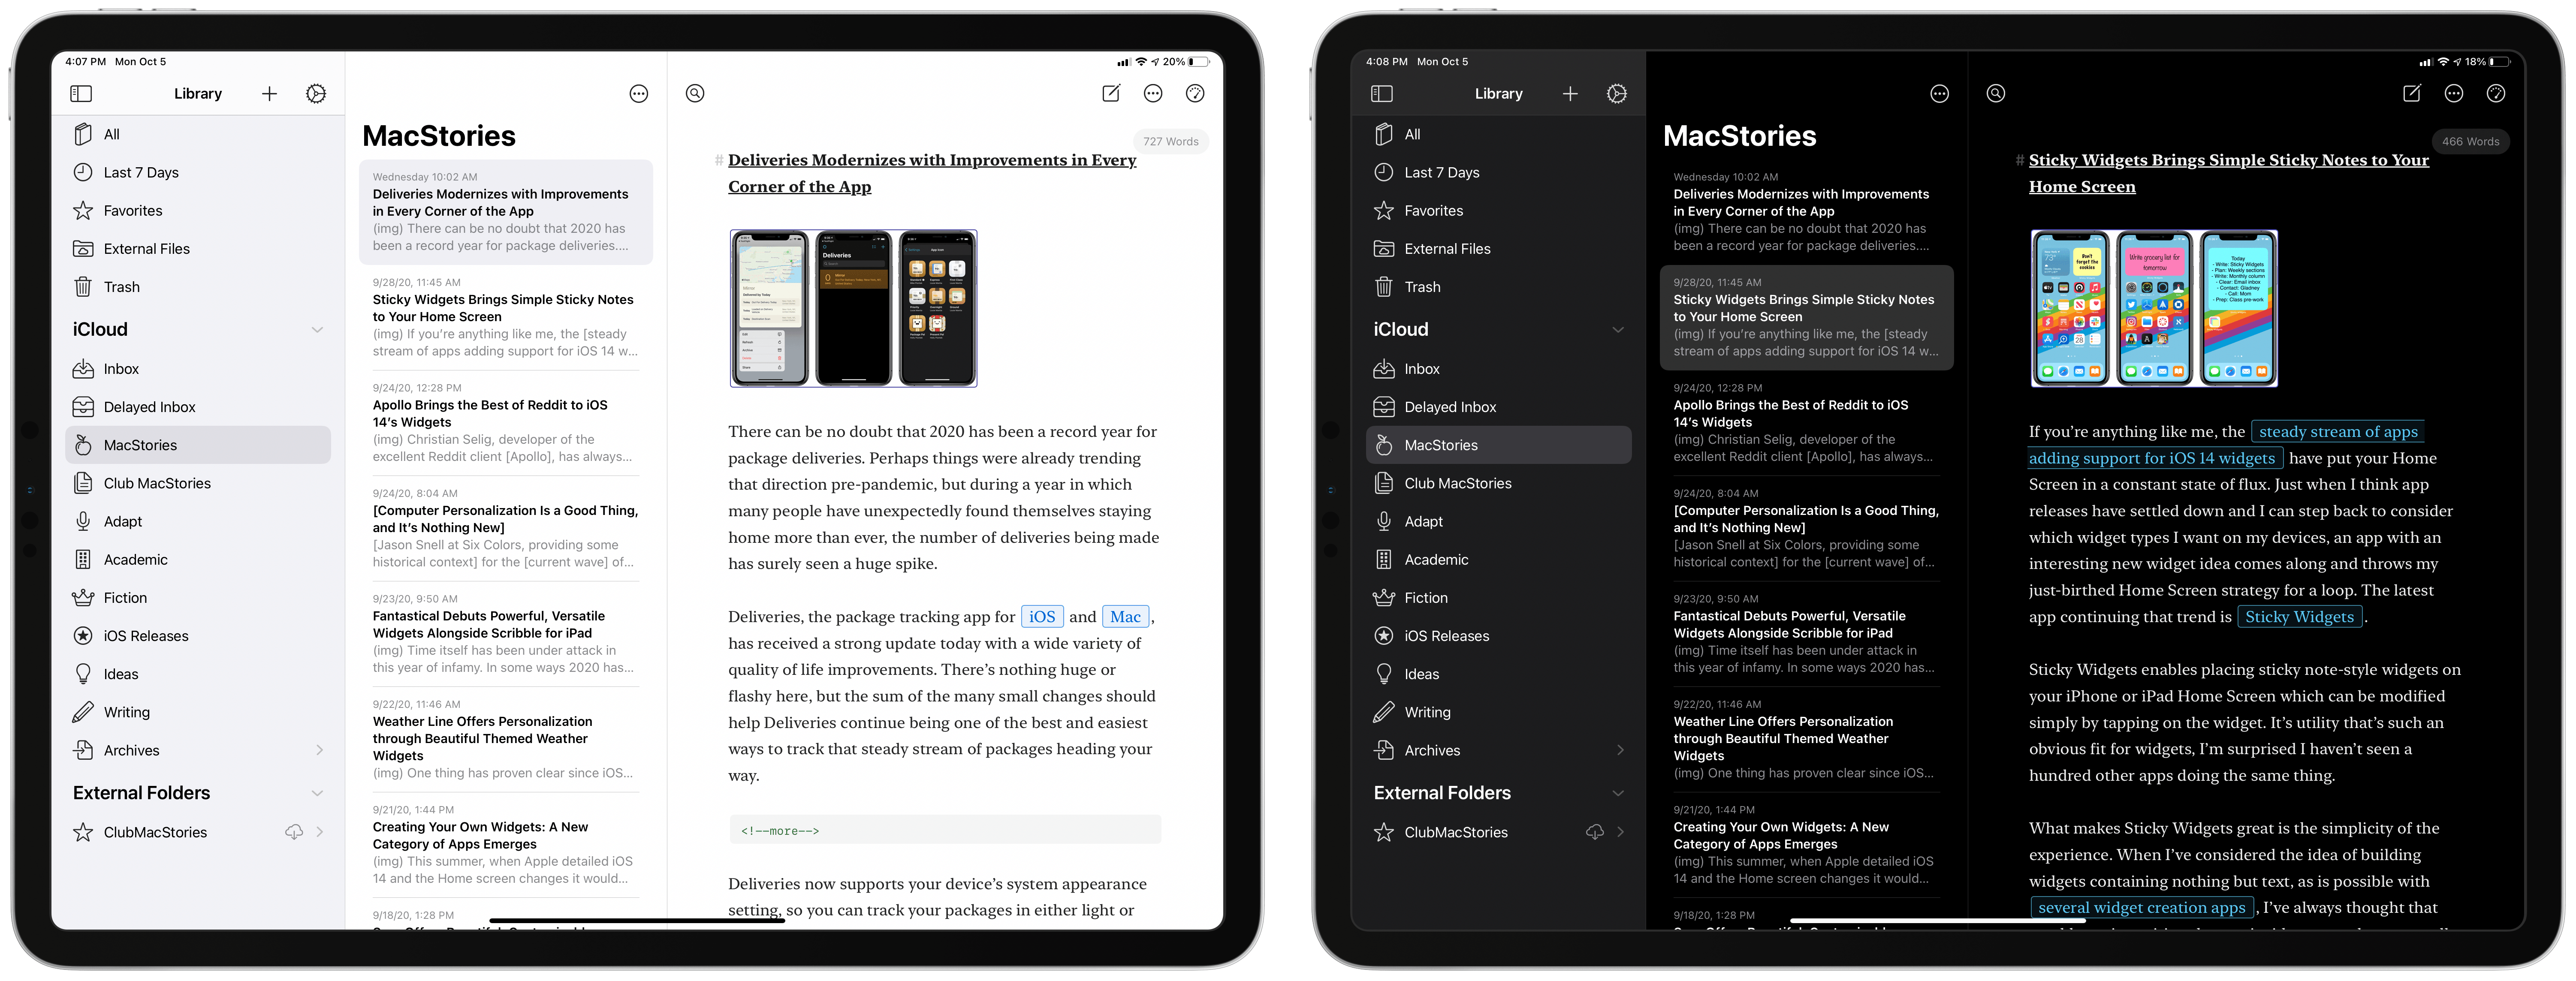 Ulysses’ new design, with no color allowed in the sidebar.